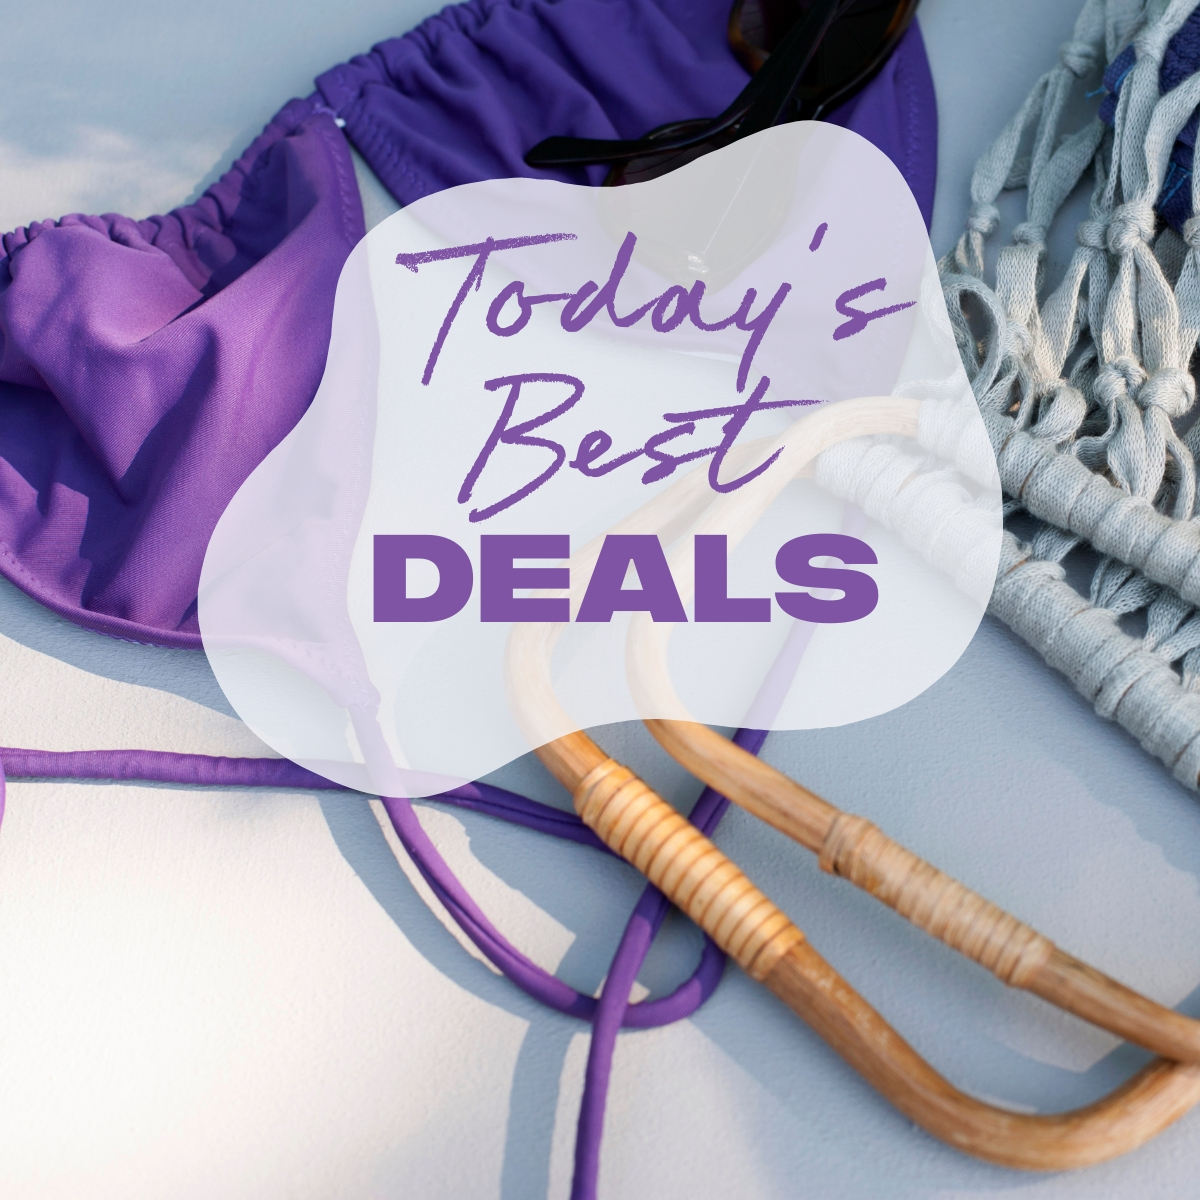 Save 50% on Aerie Swimwear, 30% on Frontgate, 25% on Kiehl’s & More